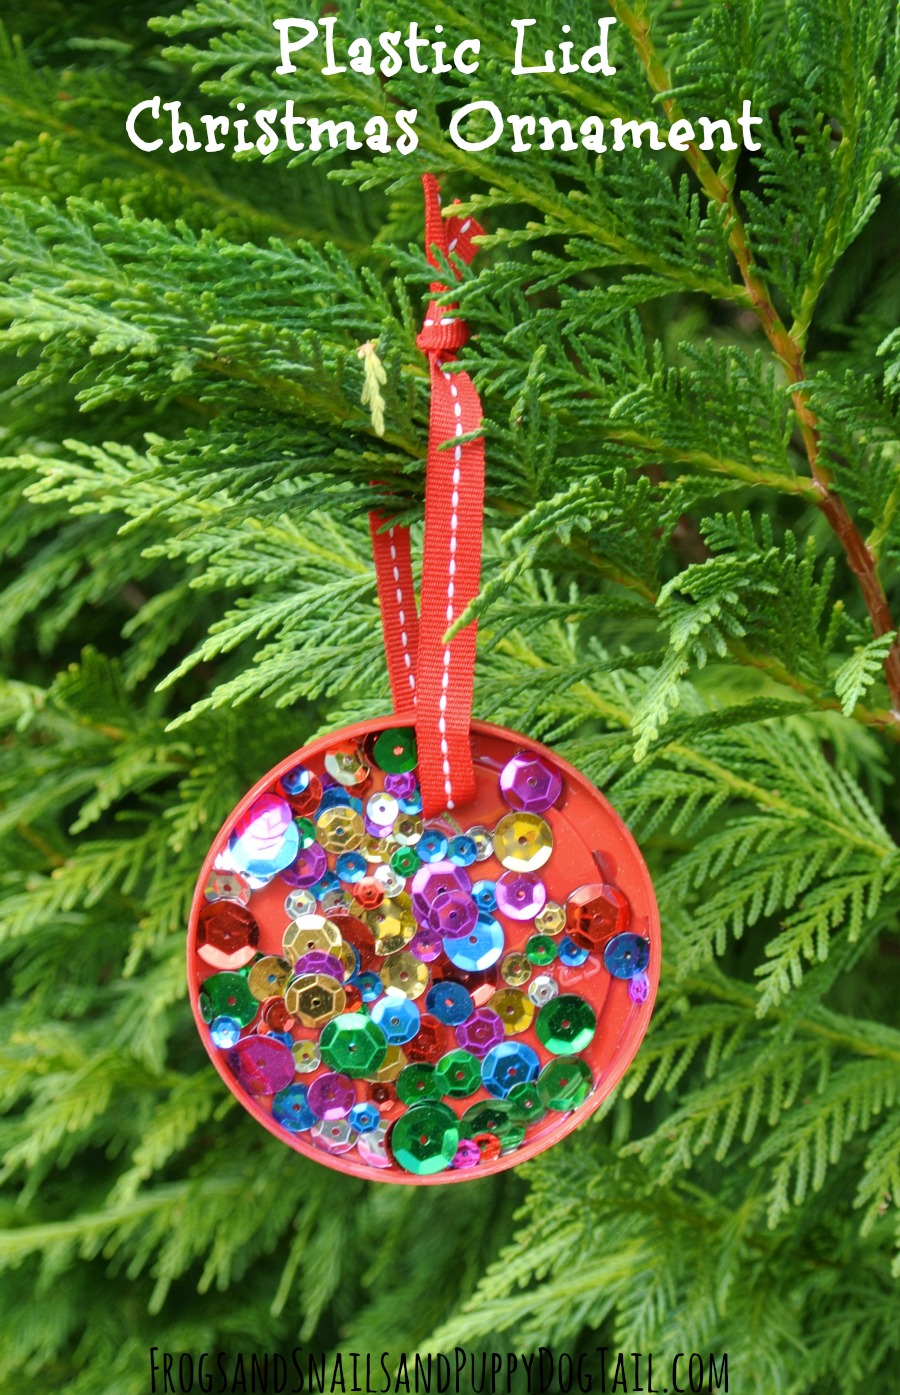 Plastic Lid Christmas Ornament: perfect for kids to make - FSPDT